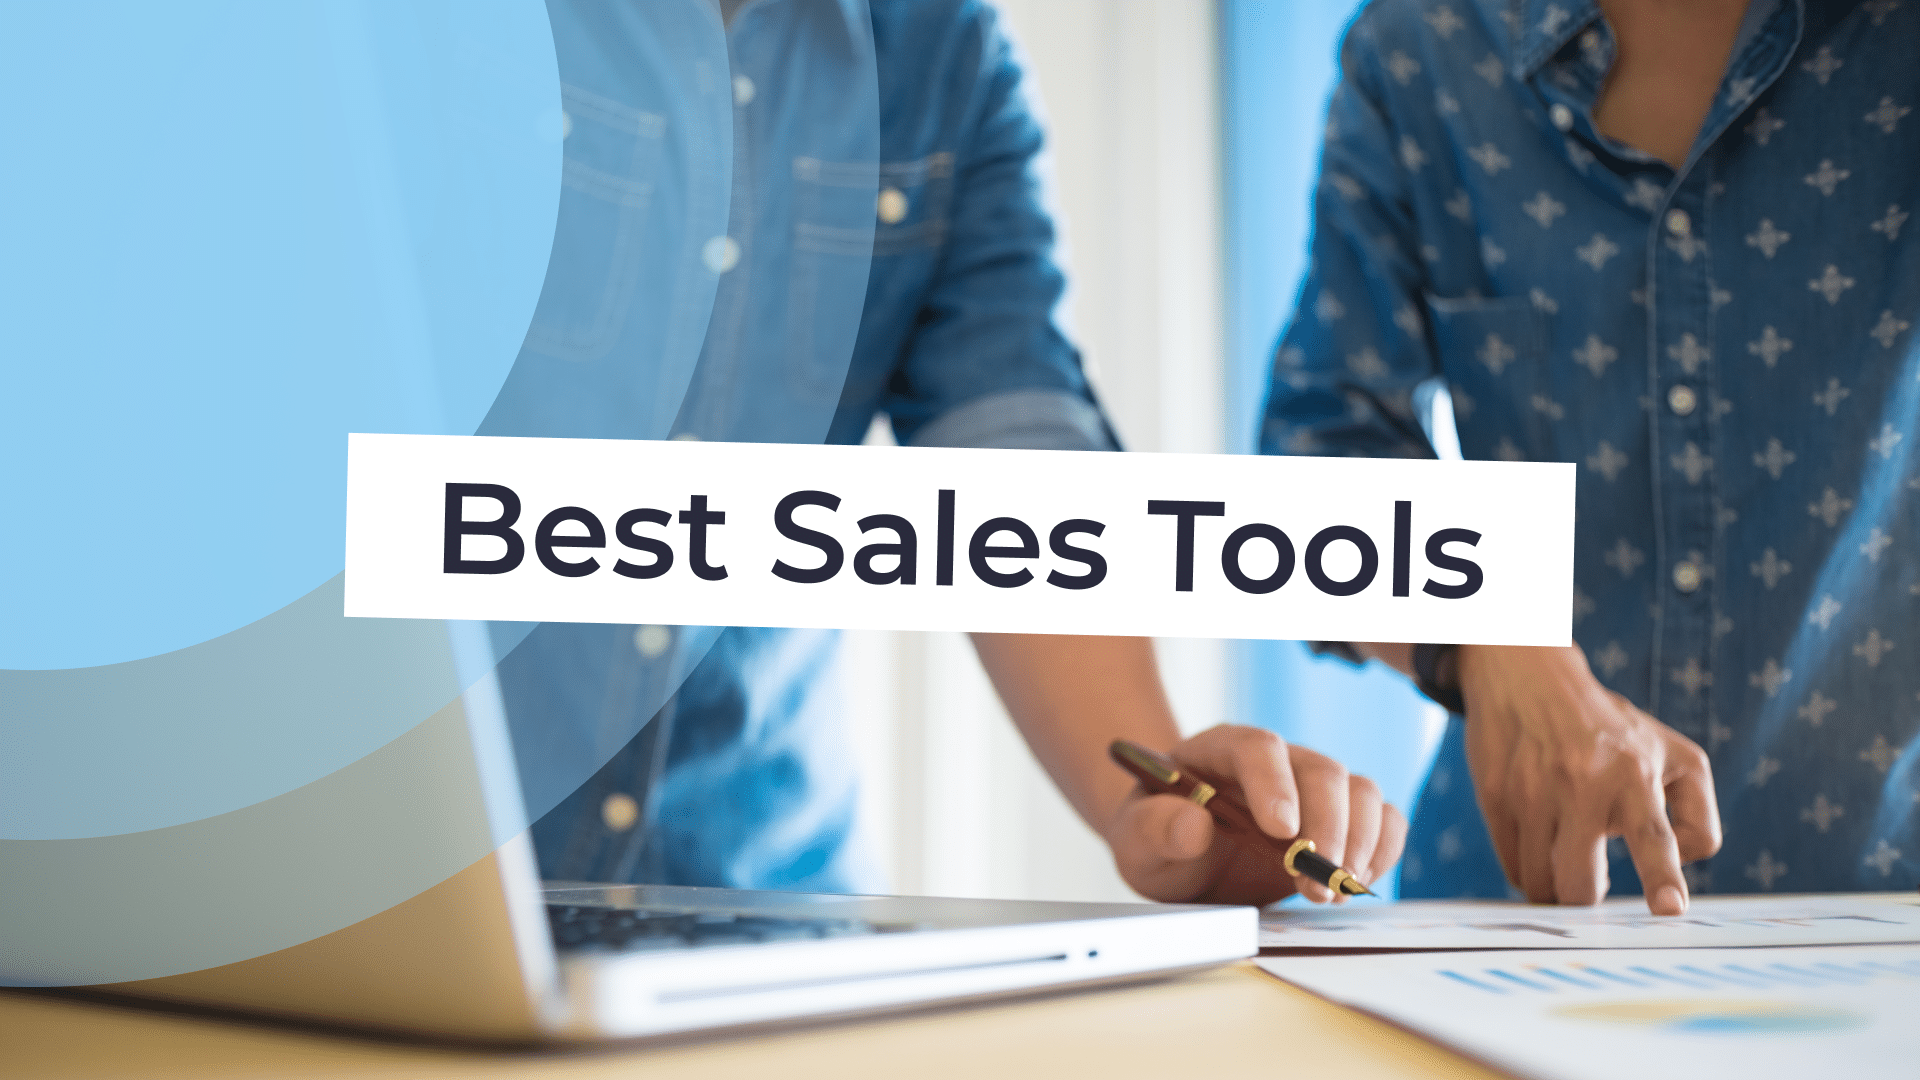 The 22 Best Sales Tools to Fast-track Leads | 2022 List